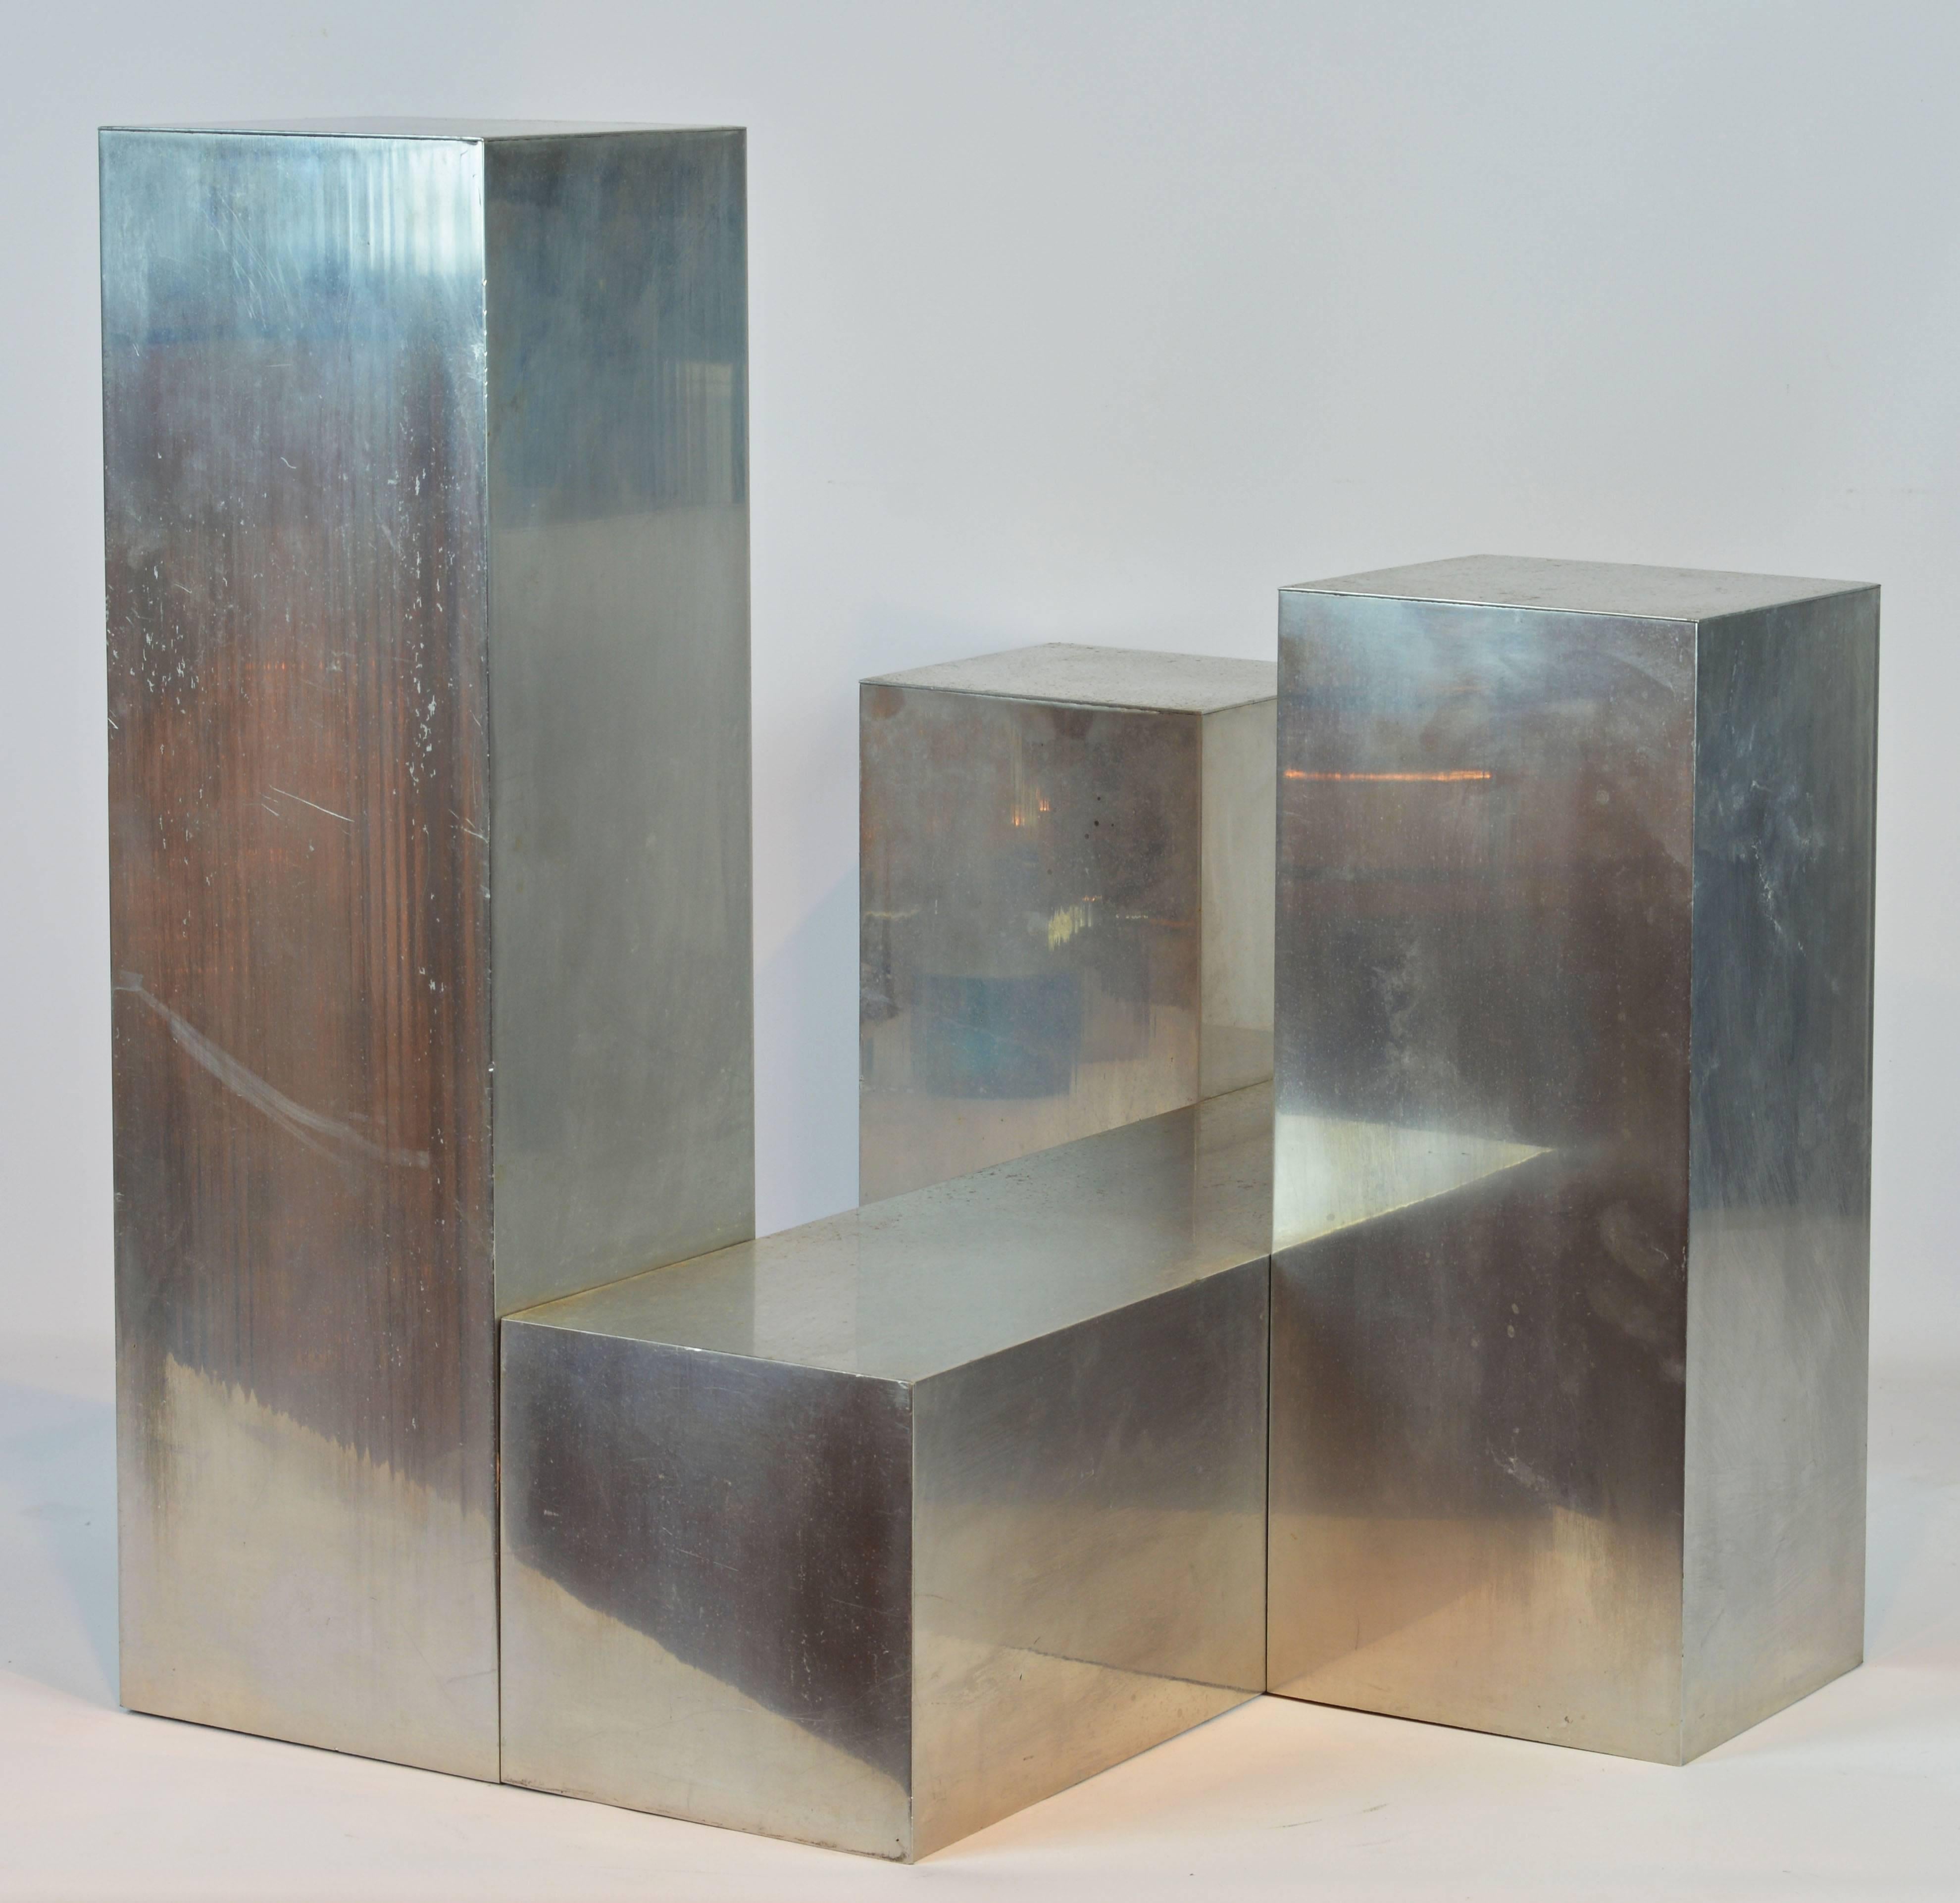 This cubist style sculpture consists of four elements combined in an intriguingly simple composition offering great views from whatever angle. The sculpture can be displayed as shown, but it also offers great surfaces for the display of artifacts.